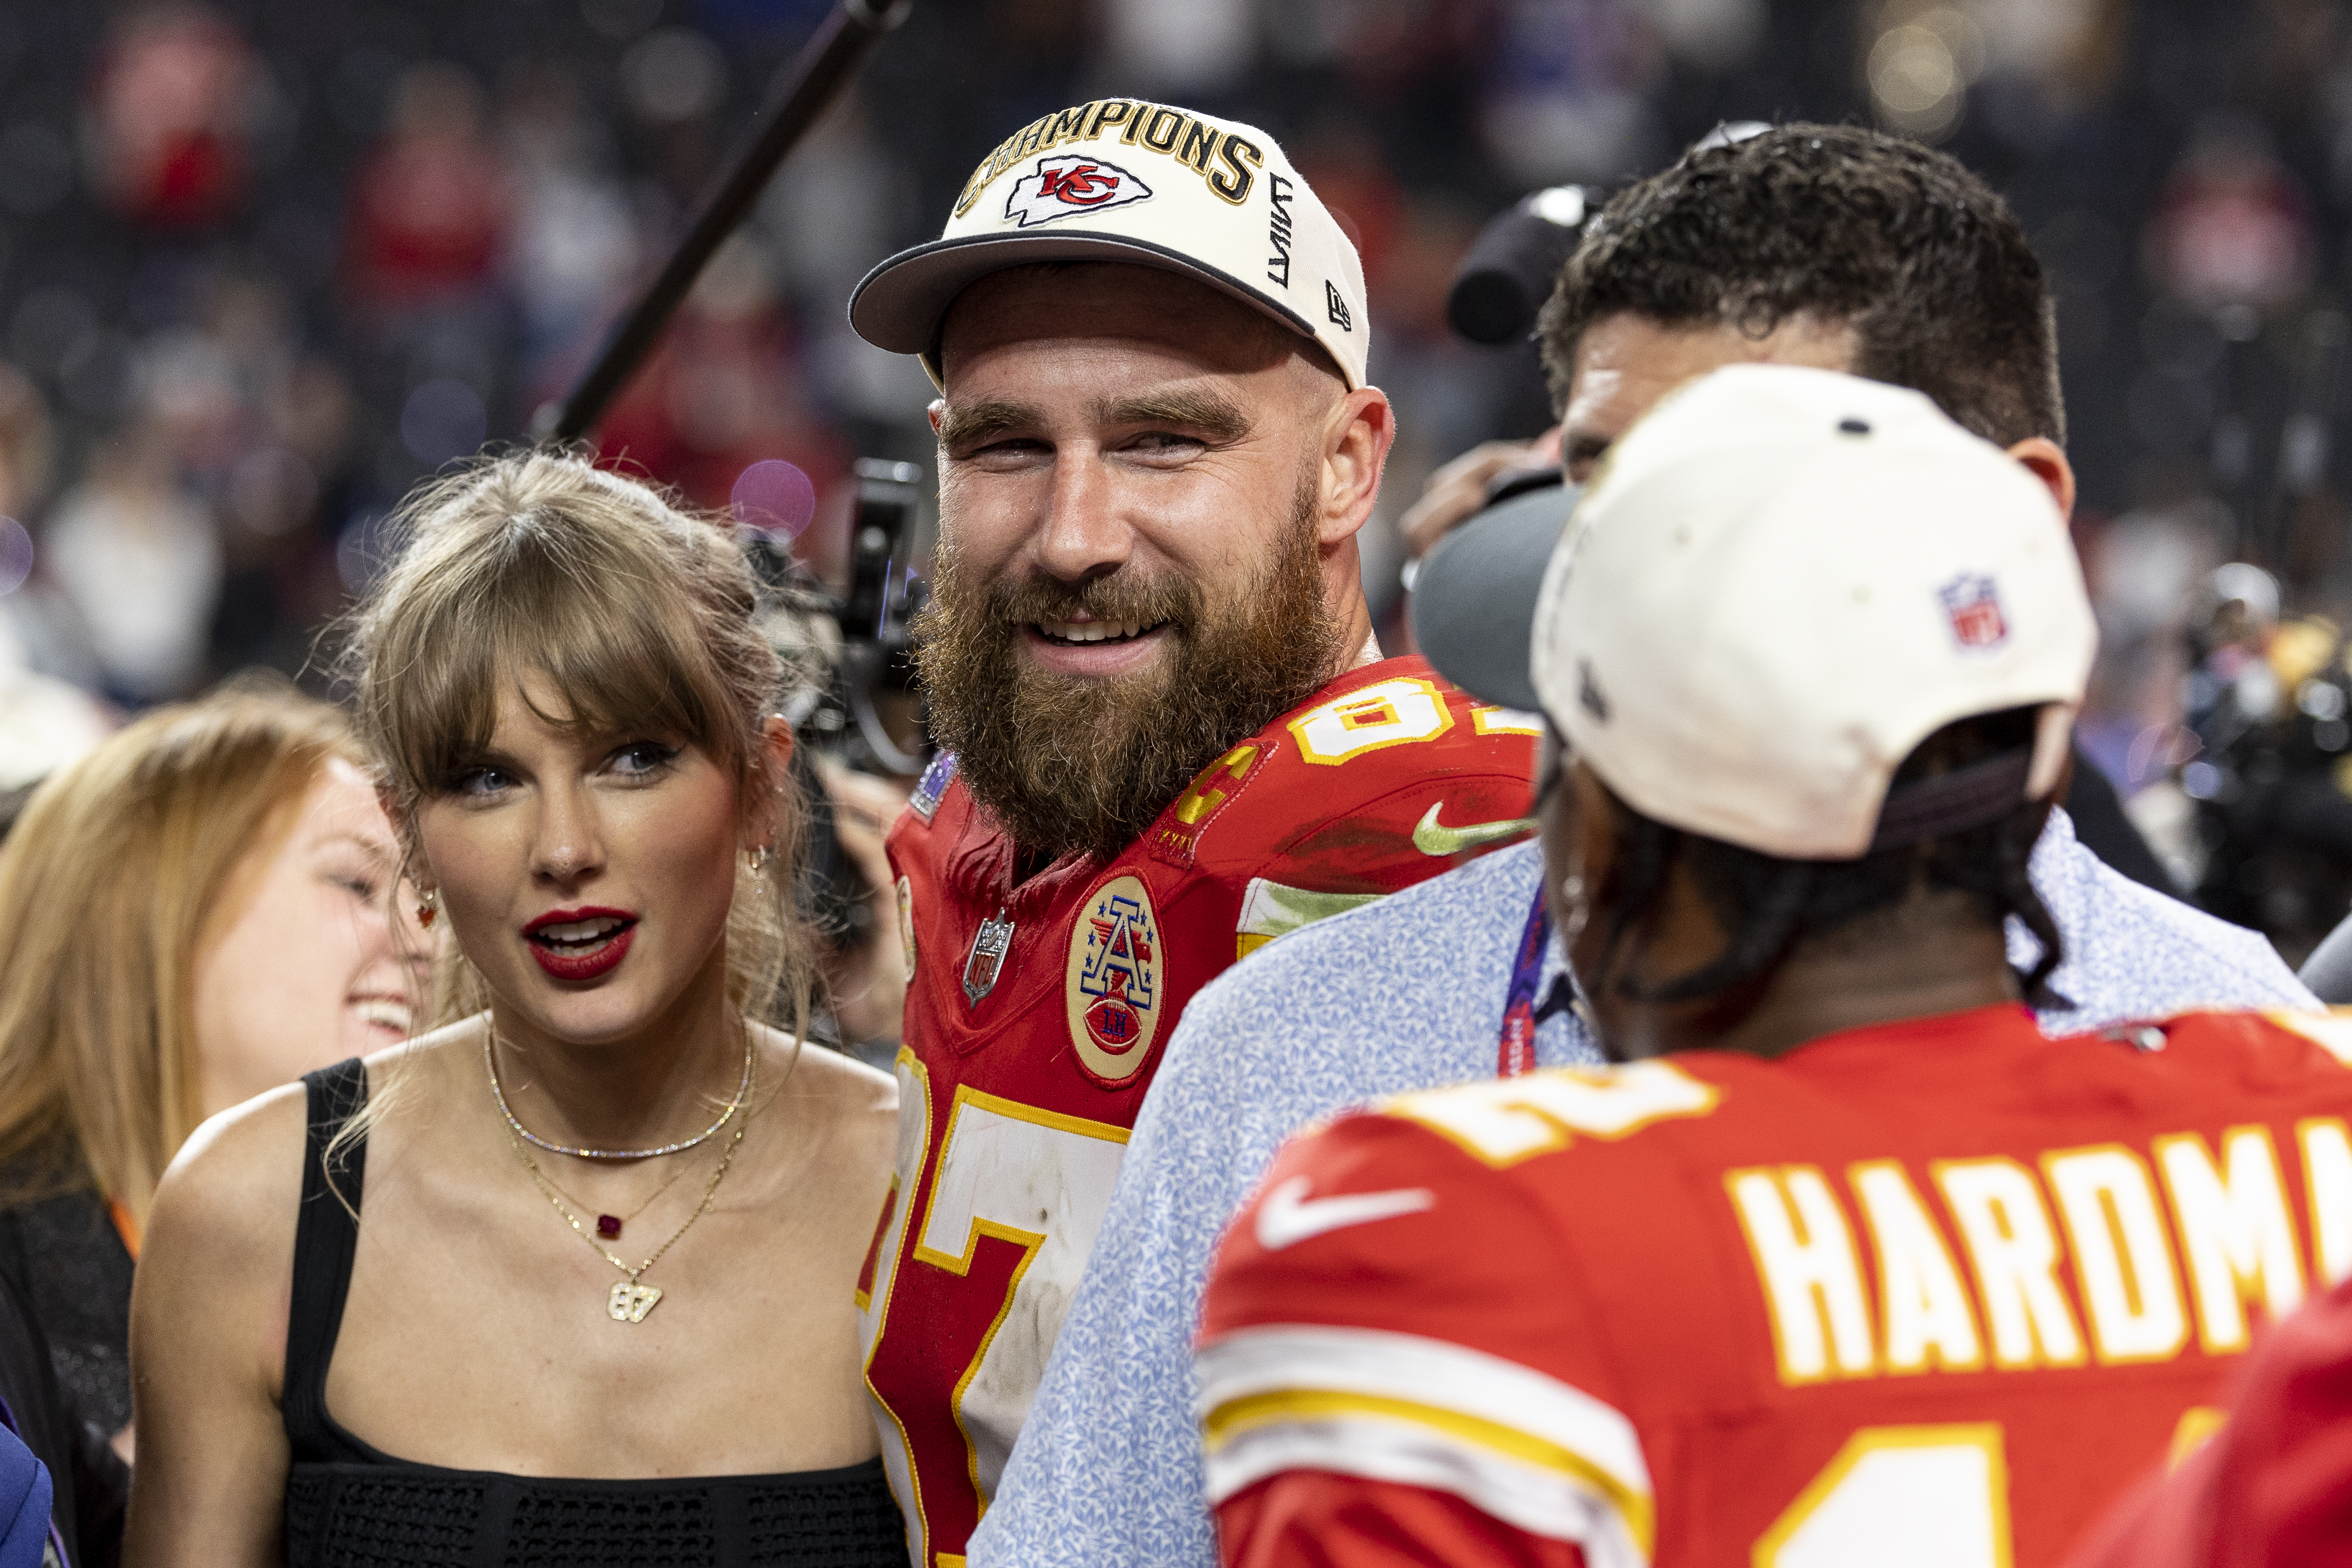 Travis Kelce has surely tried one of Taylor Swift's famous Pop Tarts by now